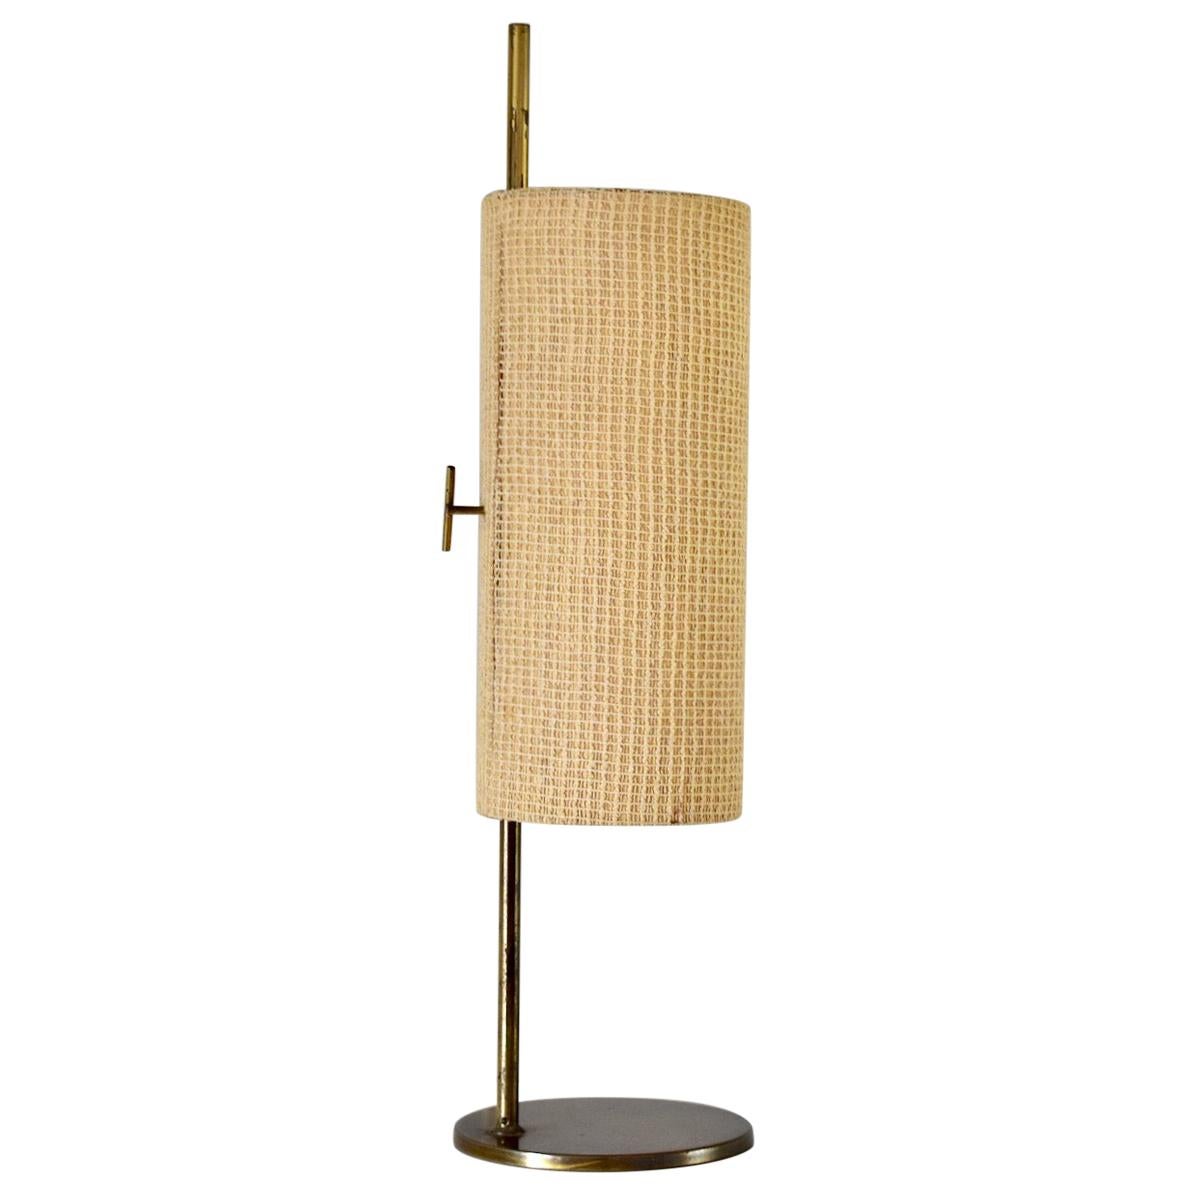 1950s Brass and Fabric Lyfa Table Lamp, Made in Denamrk